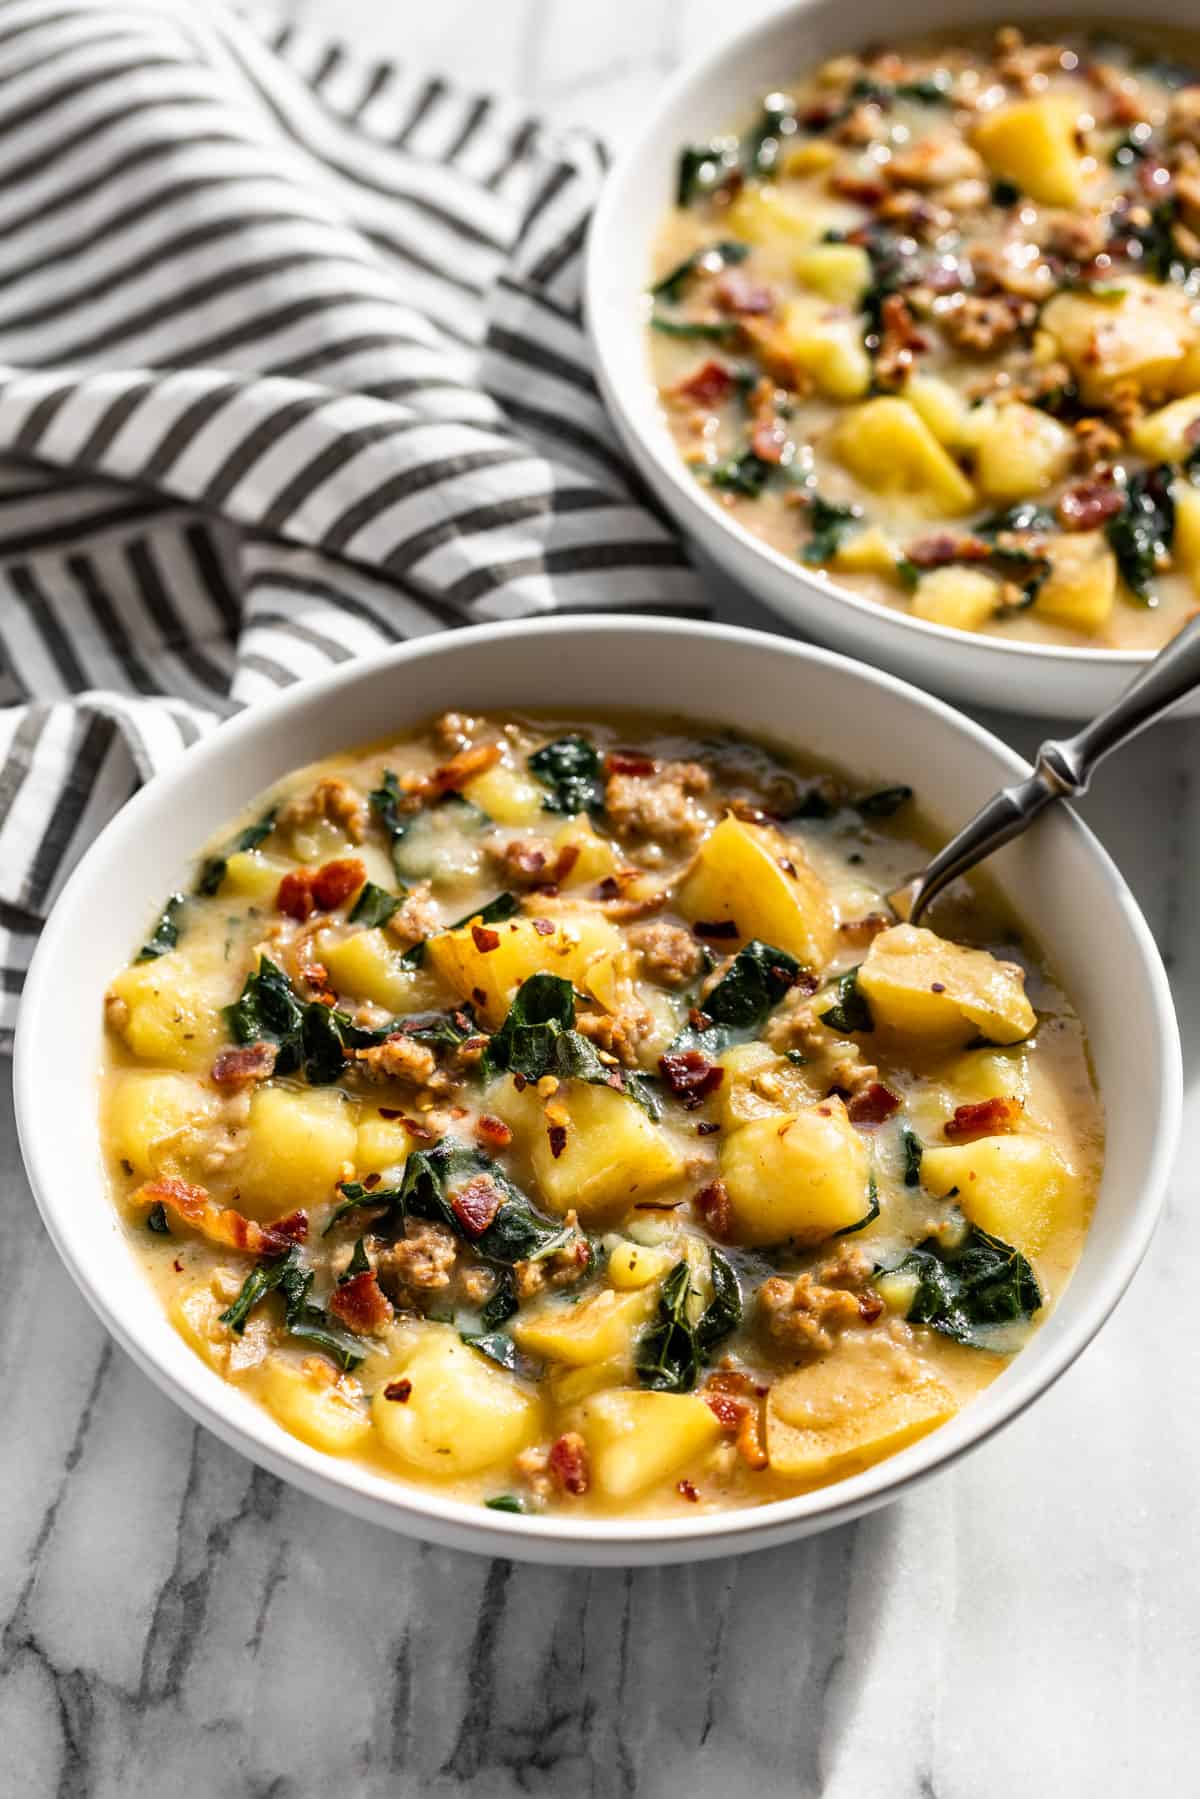 Side view of Zuppa Toscana in two bowls with spoons.